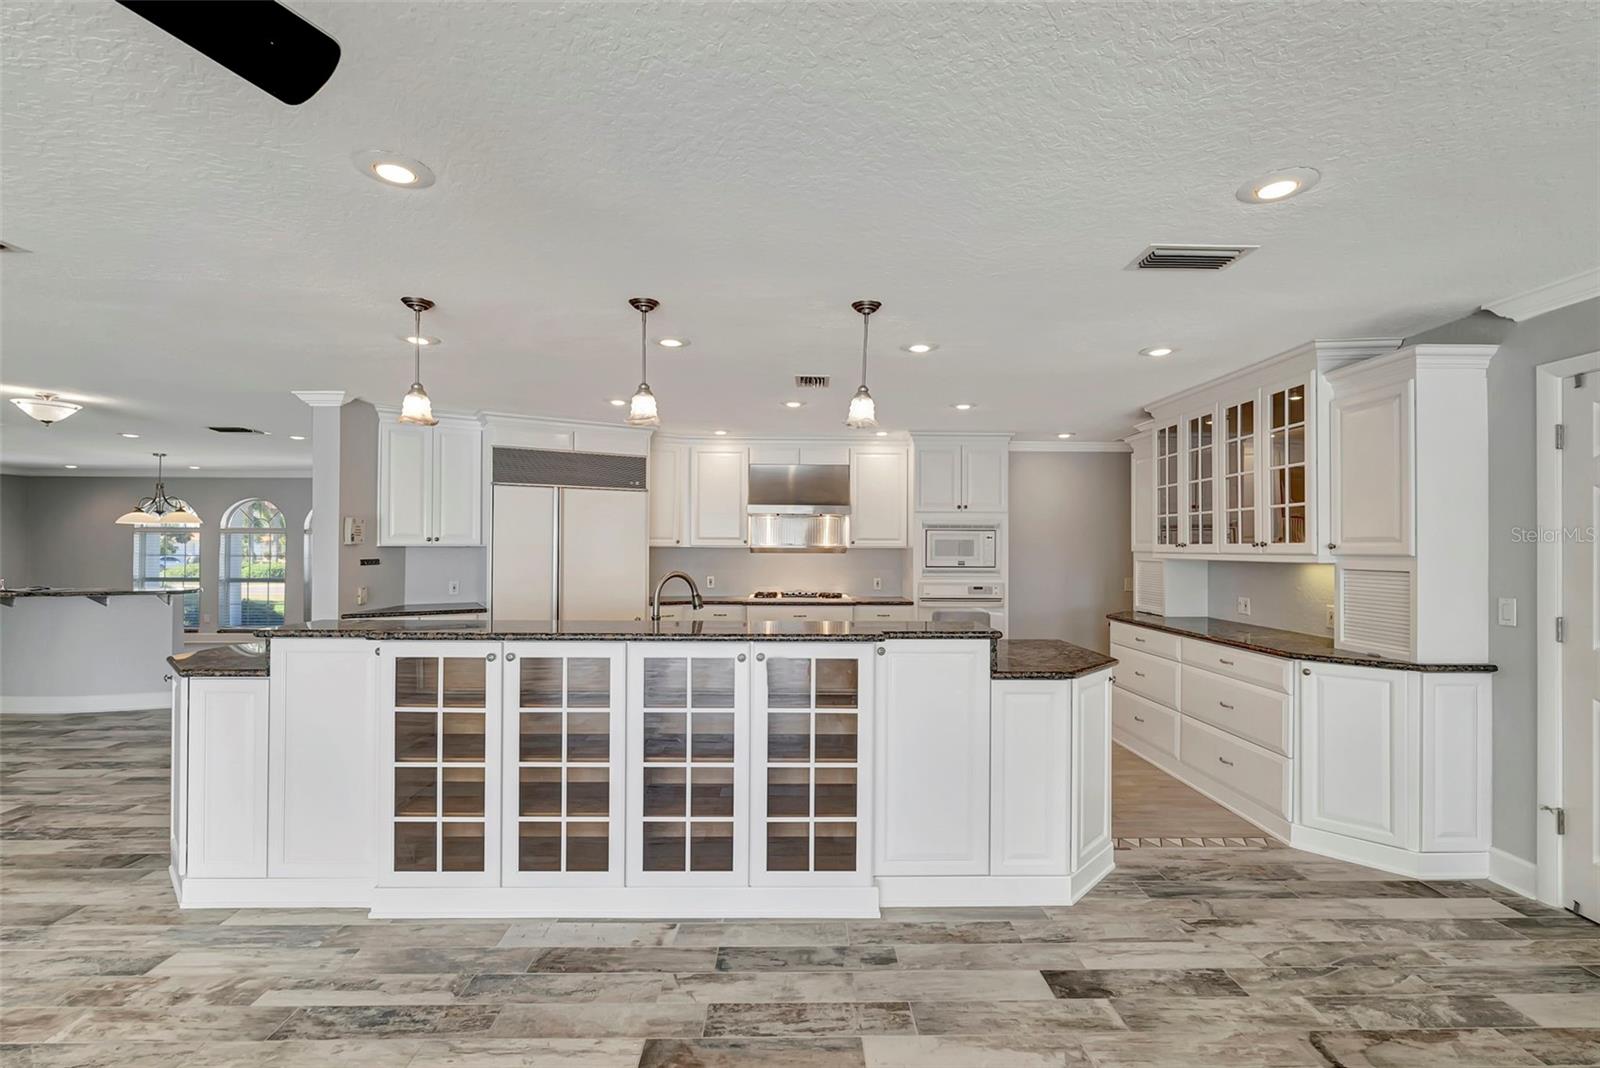 Welcome to the kitchen area, featuring stylish cabinets that blend seamlessly with the space.